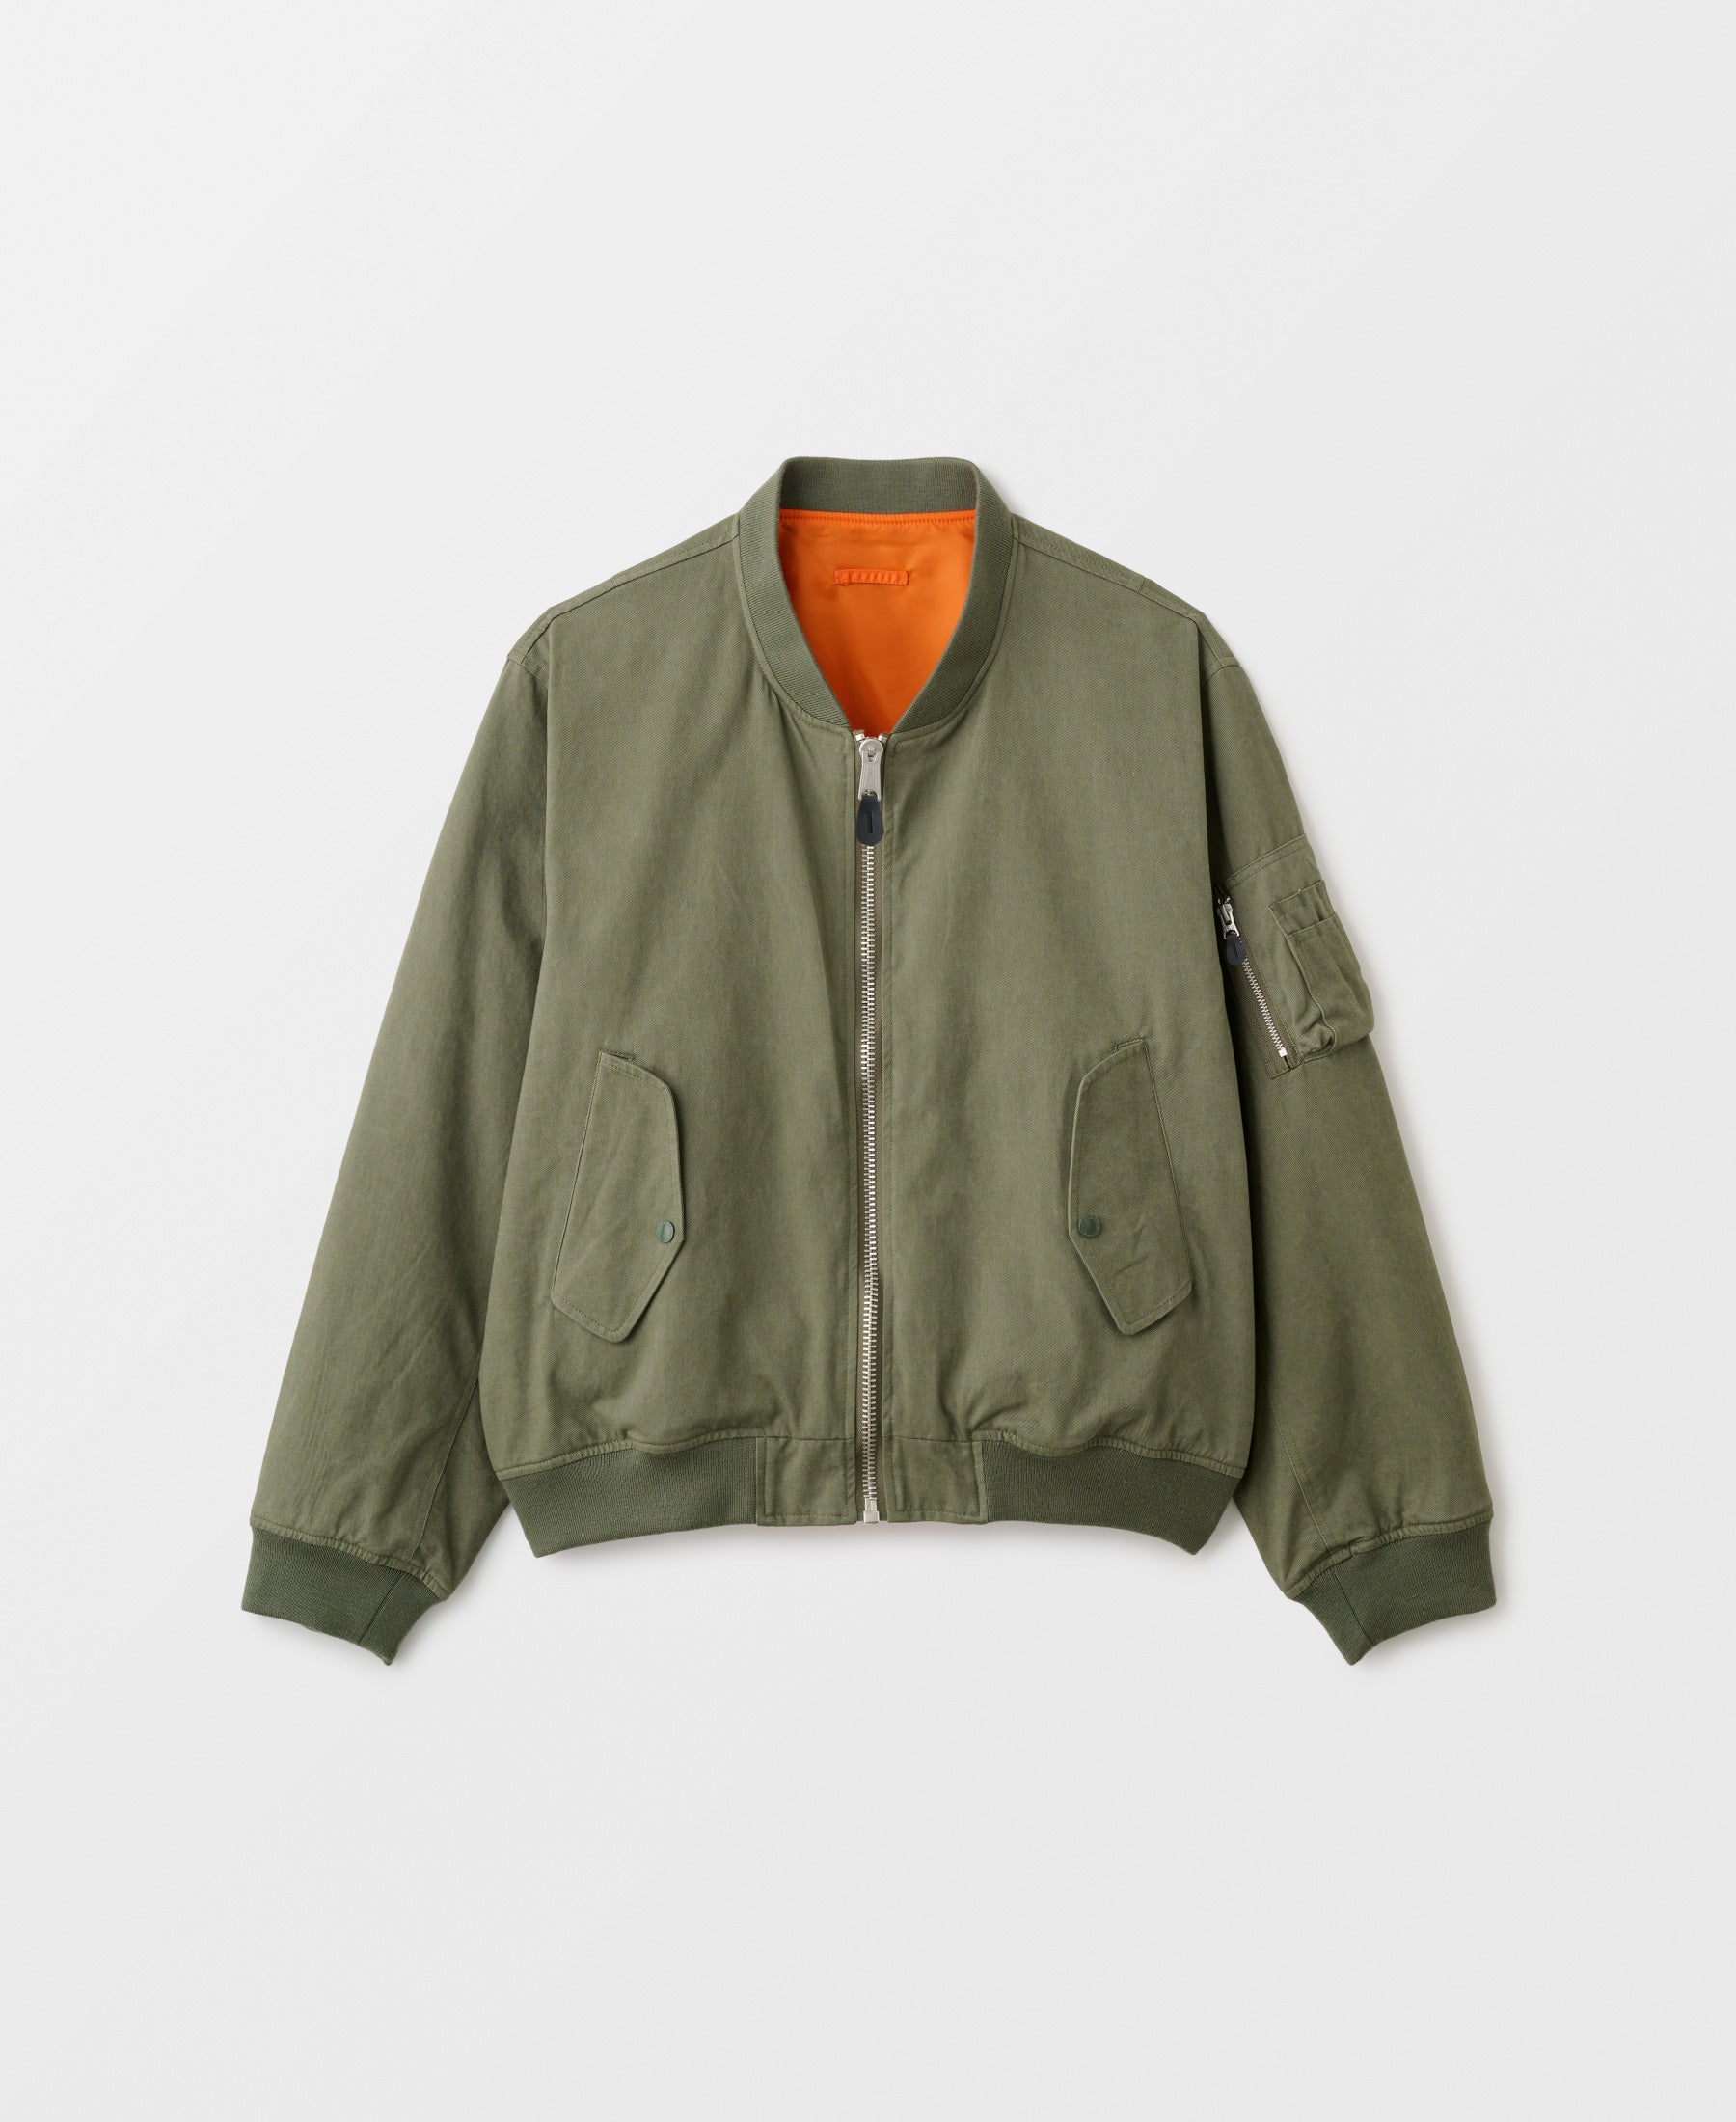 23AW | DOUBLE FACE COTTON BOMBER JACKET - OLIVE DRAB